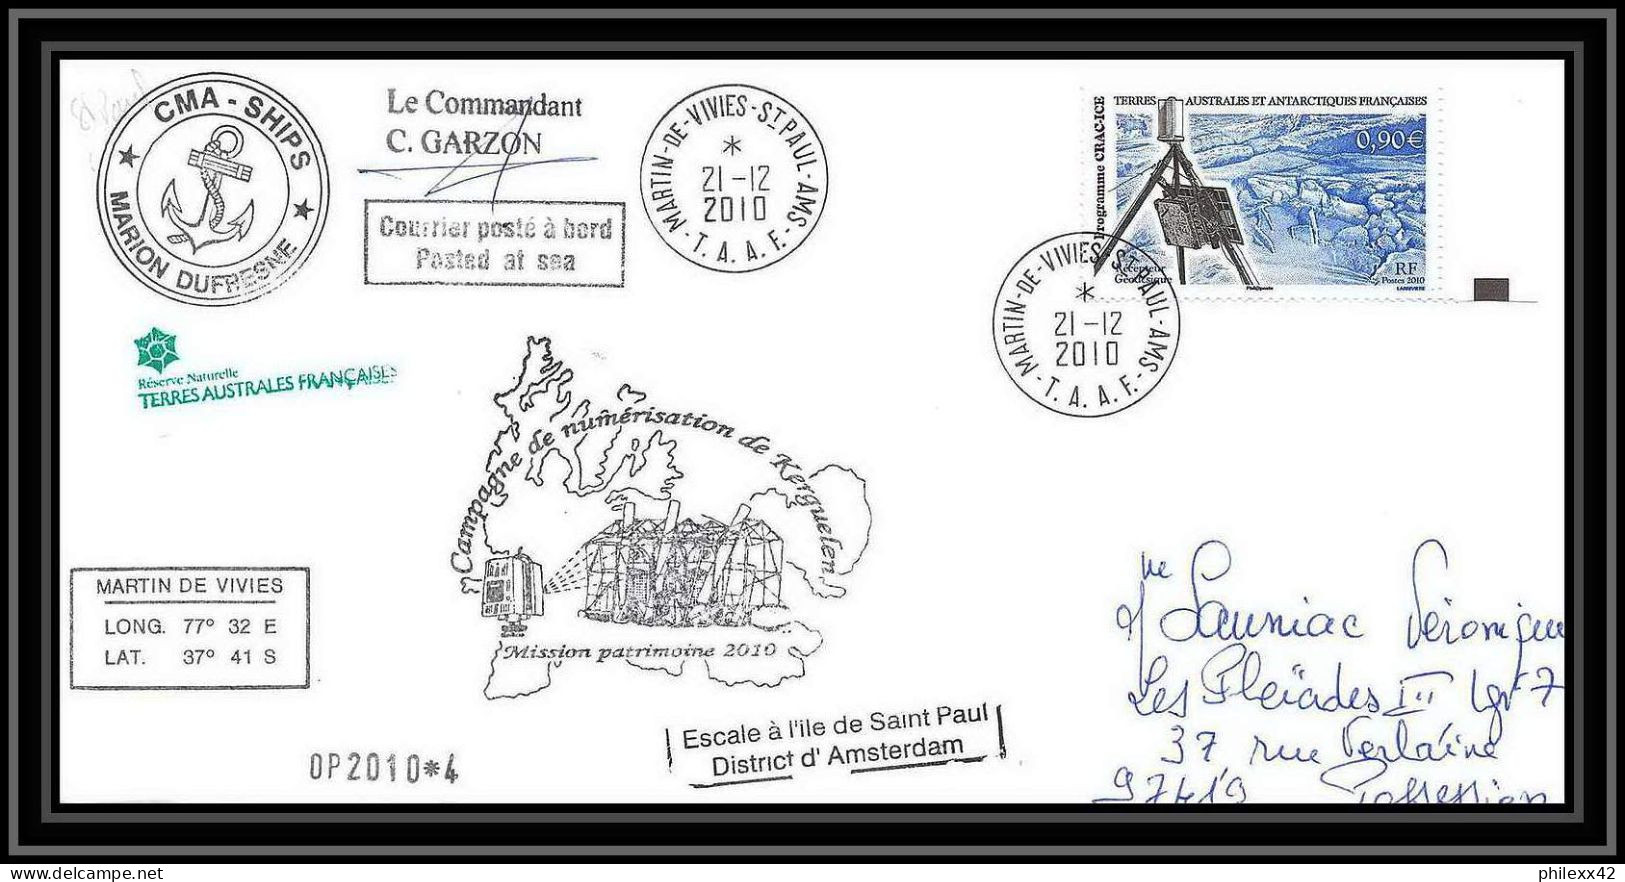 3062 Helilagon Dufresne Signé Signed Op 2010/4 St Paul 21/12/2010 N°559 ANTARCTIC Terres Australes (taaf) Lettre Cover - Hélicoptères